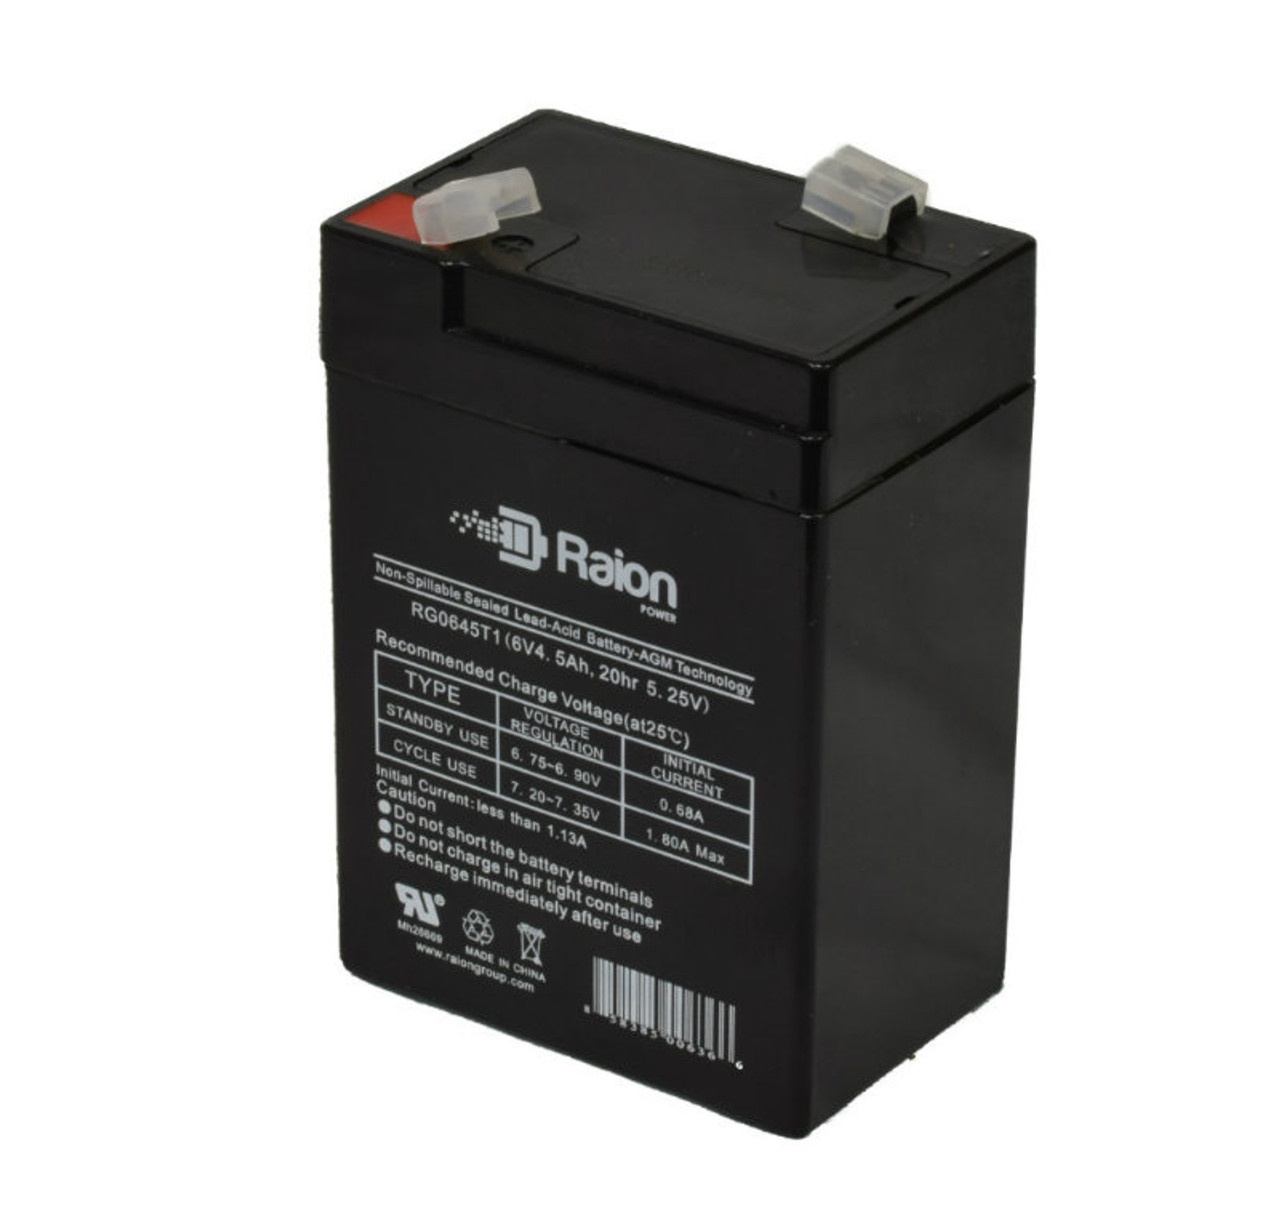 Raion Power RG0645T1 6V 4.5Ah Replacement Battery Cartridge for Lithonia XP XS